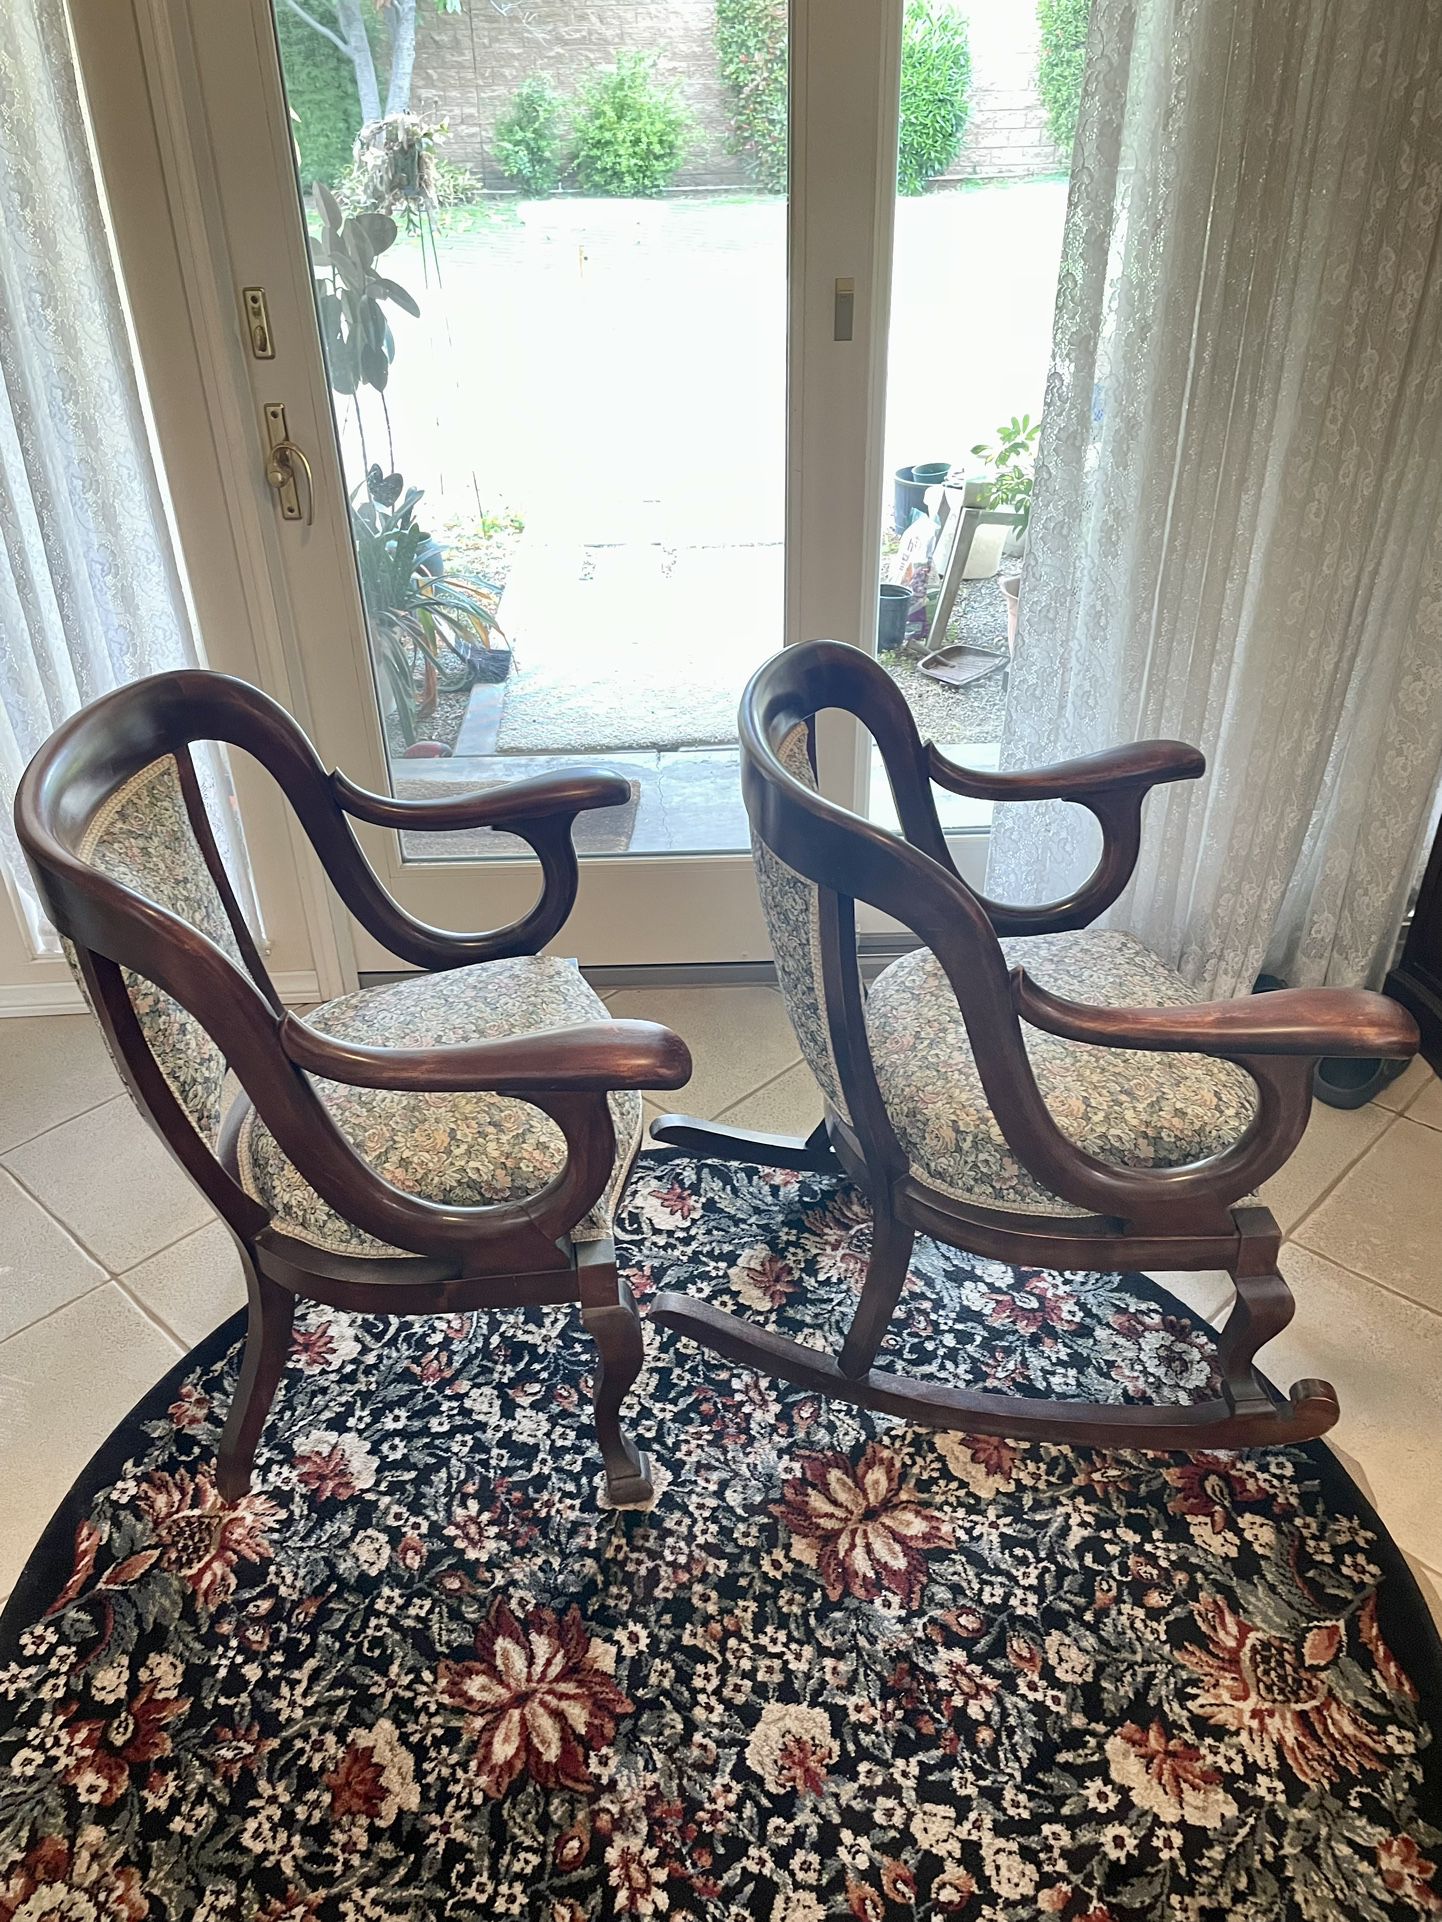 Vintage Antique Chair And Rocker $475 For Both OBO